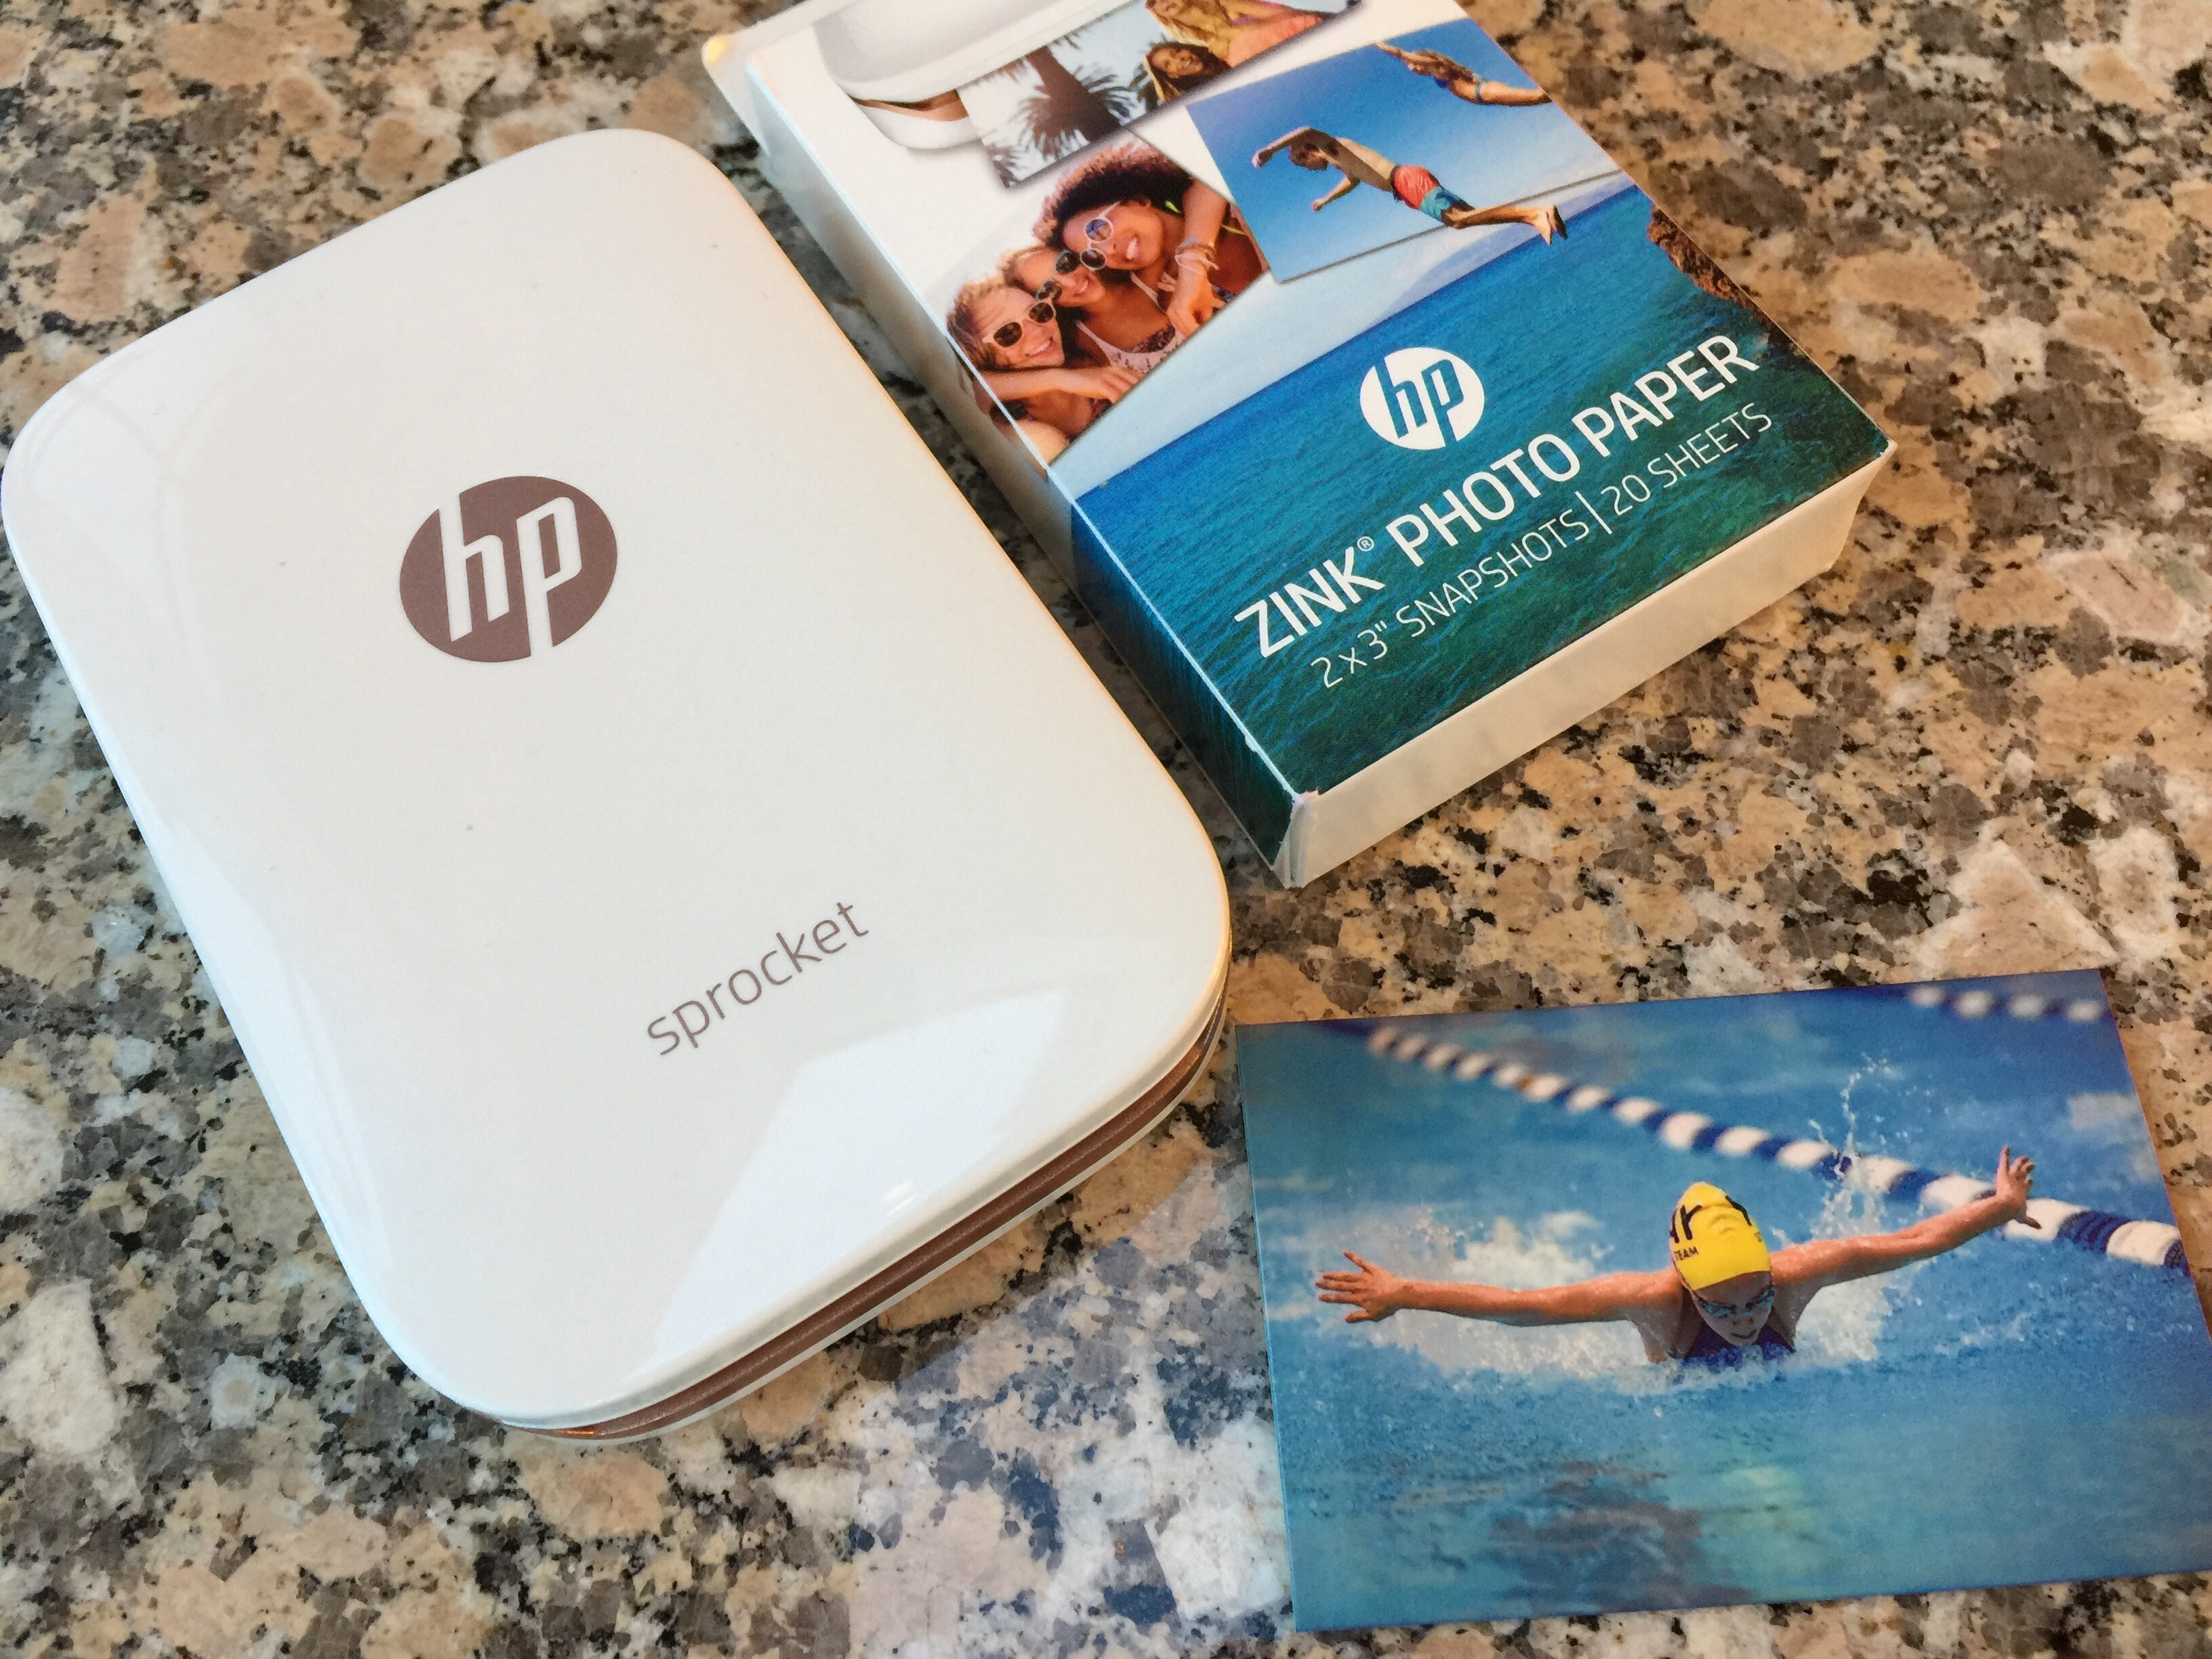 HP Sprocket Smartphone Printer Video Review and Demo